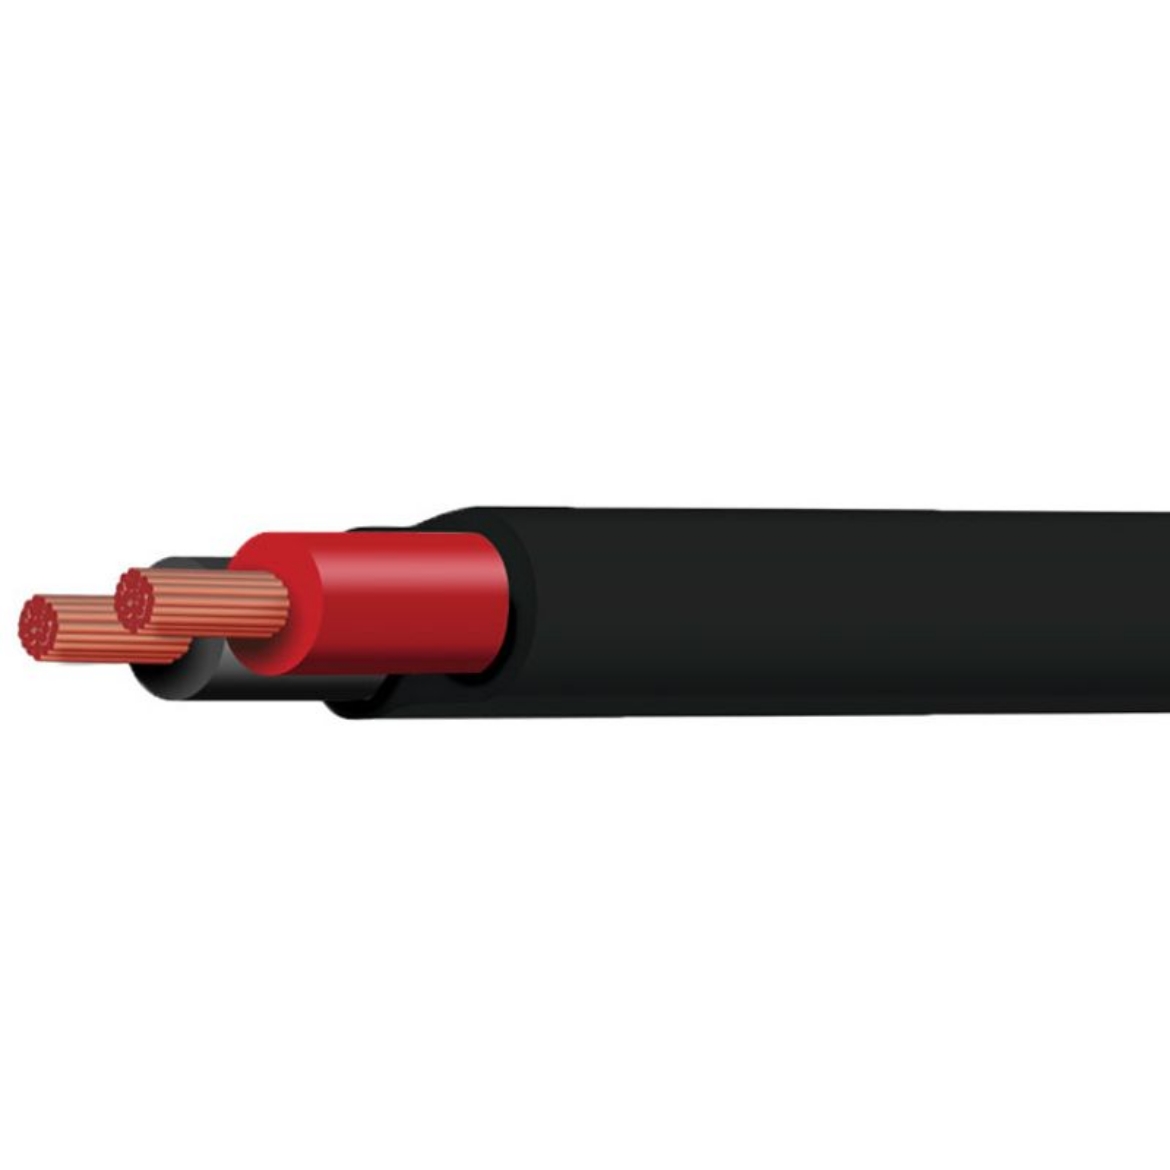 Picture of TYCAB 3MM TWIN CORE CABLE 16A TWIN SHEATH BLACK/RED - 30M ROLL